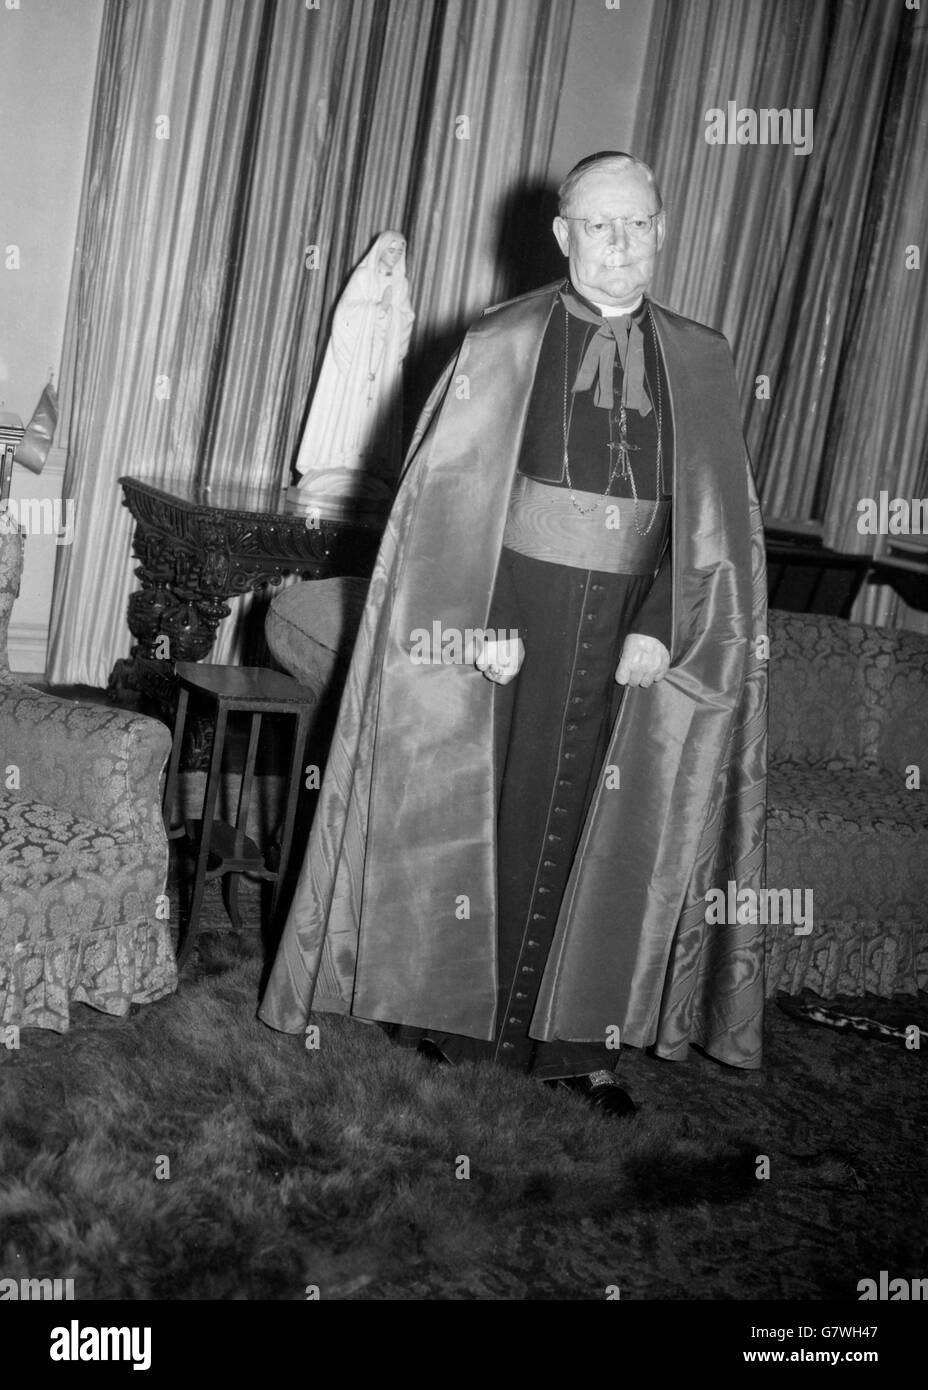 Pictured as his residence, Archbishop's House, Westminster, London, is Dr. William Godfrey, Roman Catholic Archbishop of Westminster, one of 23 new Cardinals announced in Rome. 69 year old Dr. Godfrey was born in Liverpool and was ordained in 1916. Shortly before the last war, he was appointed Apostolic Delegate in Britain, the first resident papal envoy in this country since the reformation. In 1953, Dr. Godfrey became Archbishop of Westminster after the death of Cardinal Griffin in 1956. Stock Photo